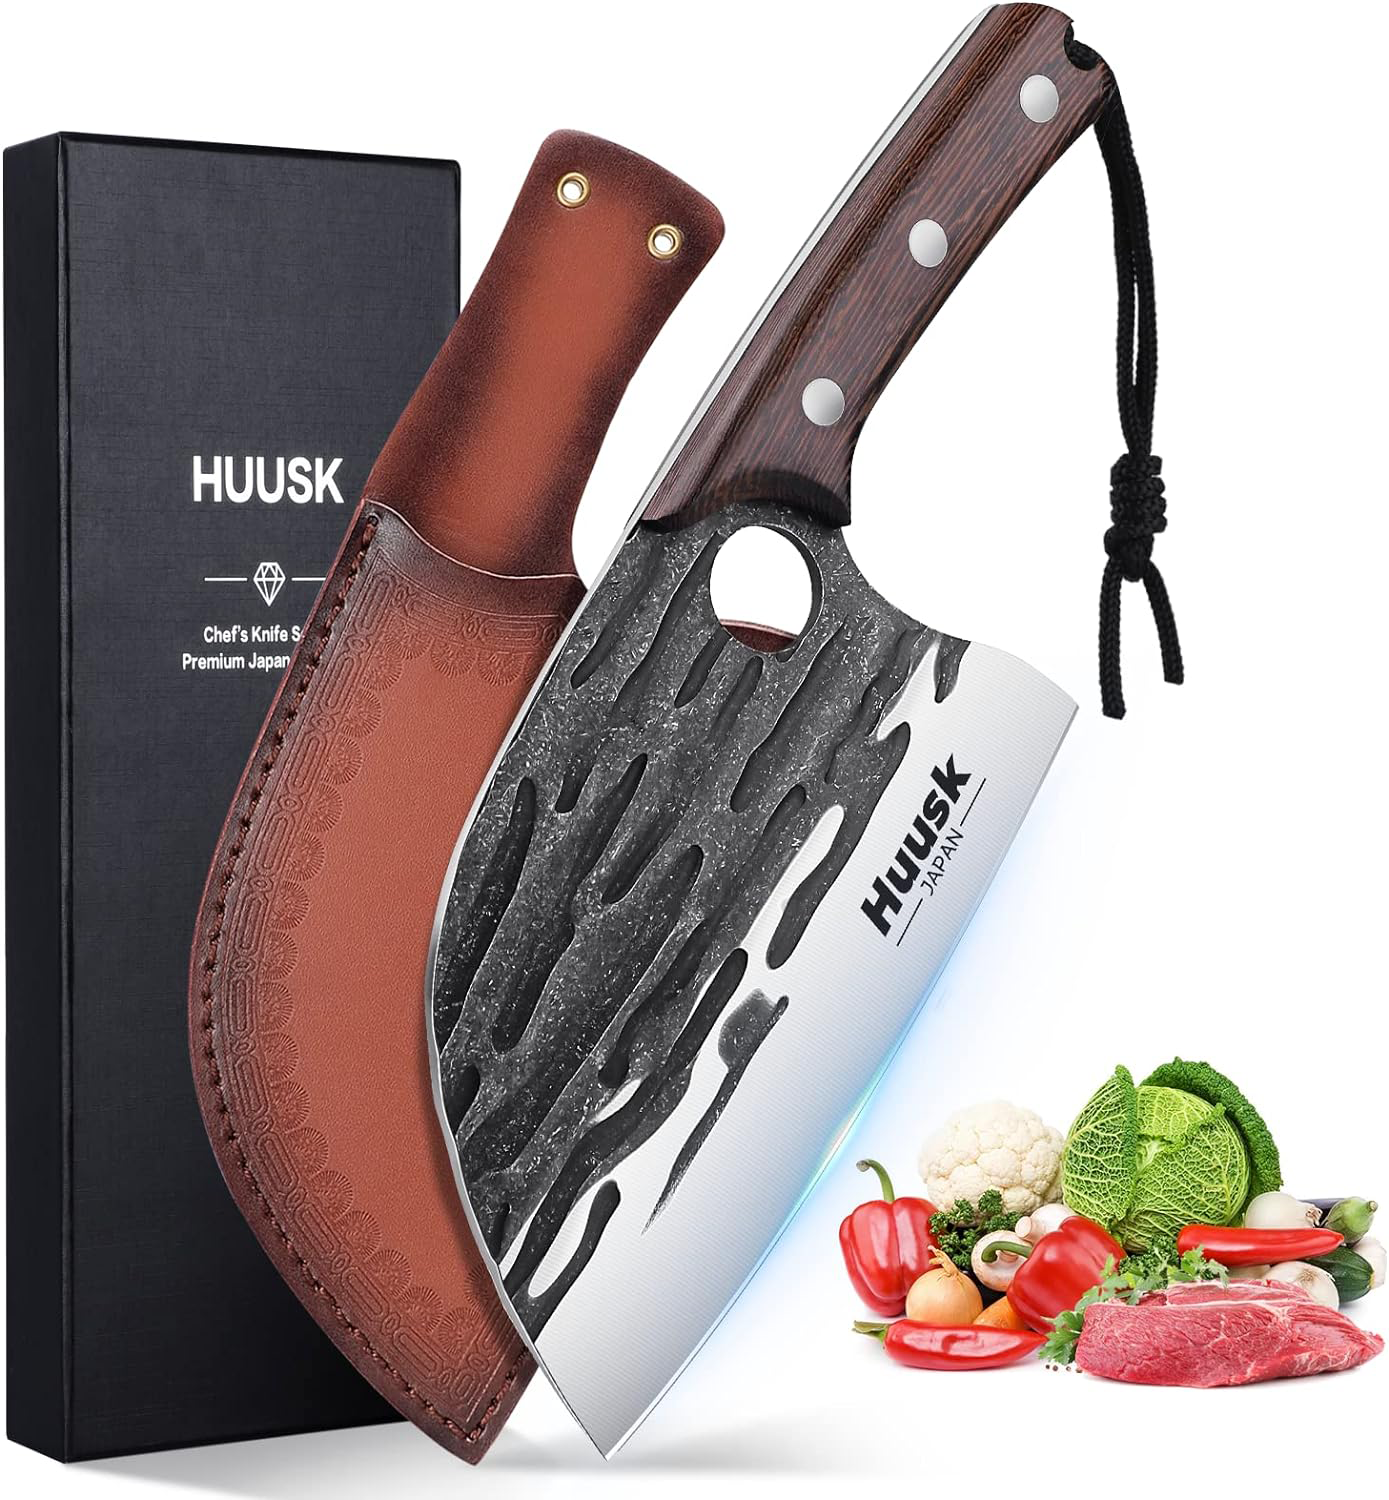 Huusk Japanese Kitchen Knife, Perfect for all kitchen cutting and chopping